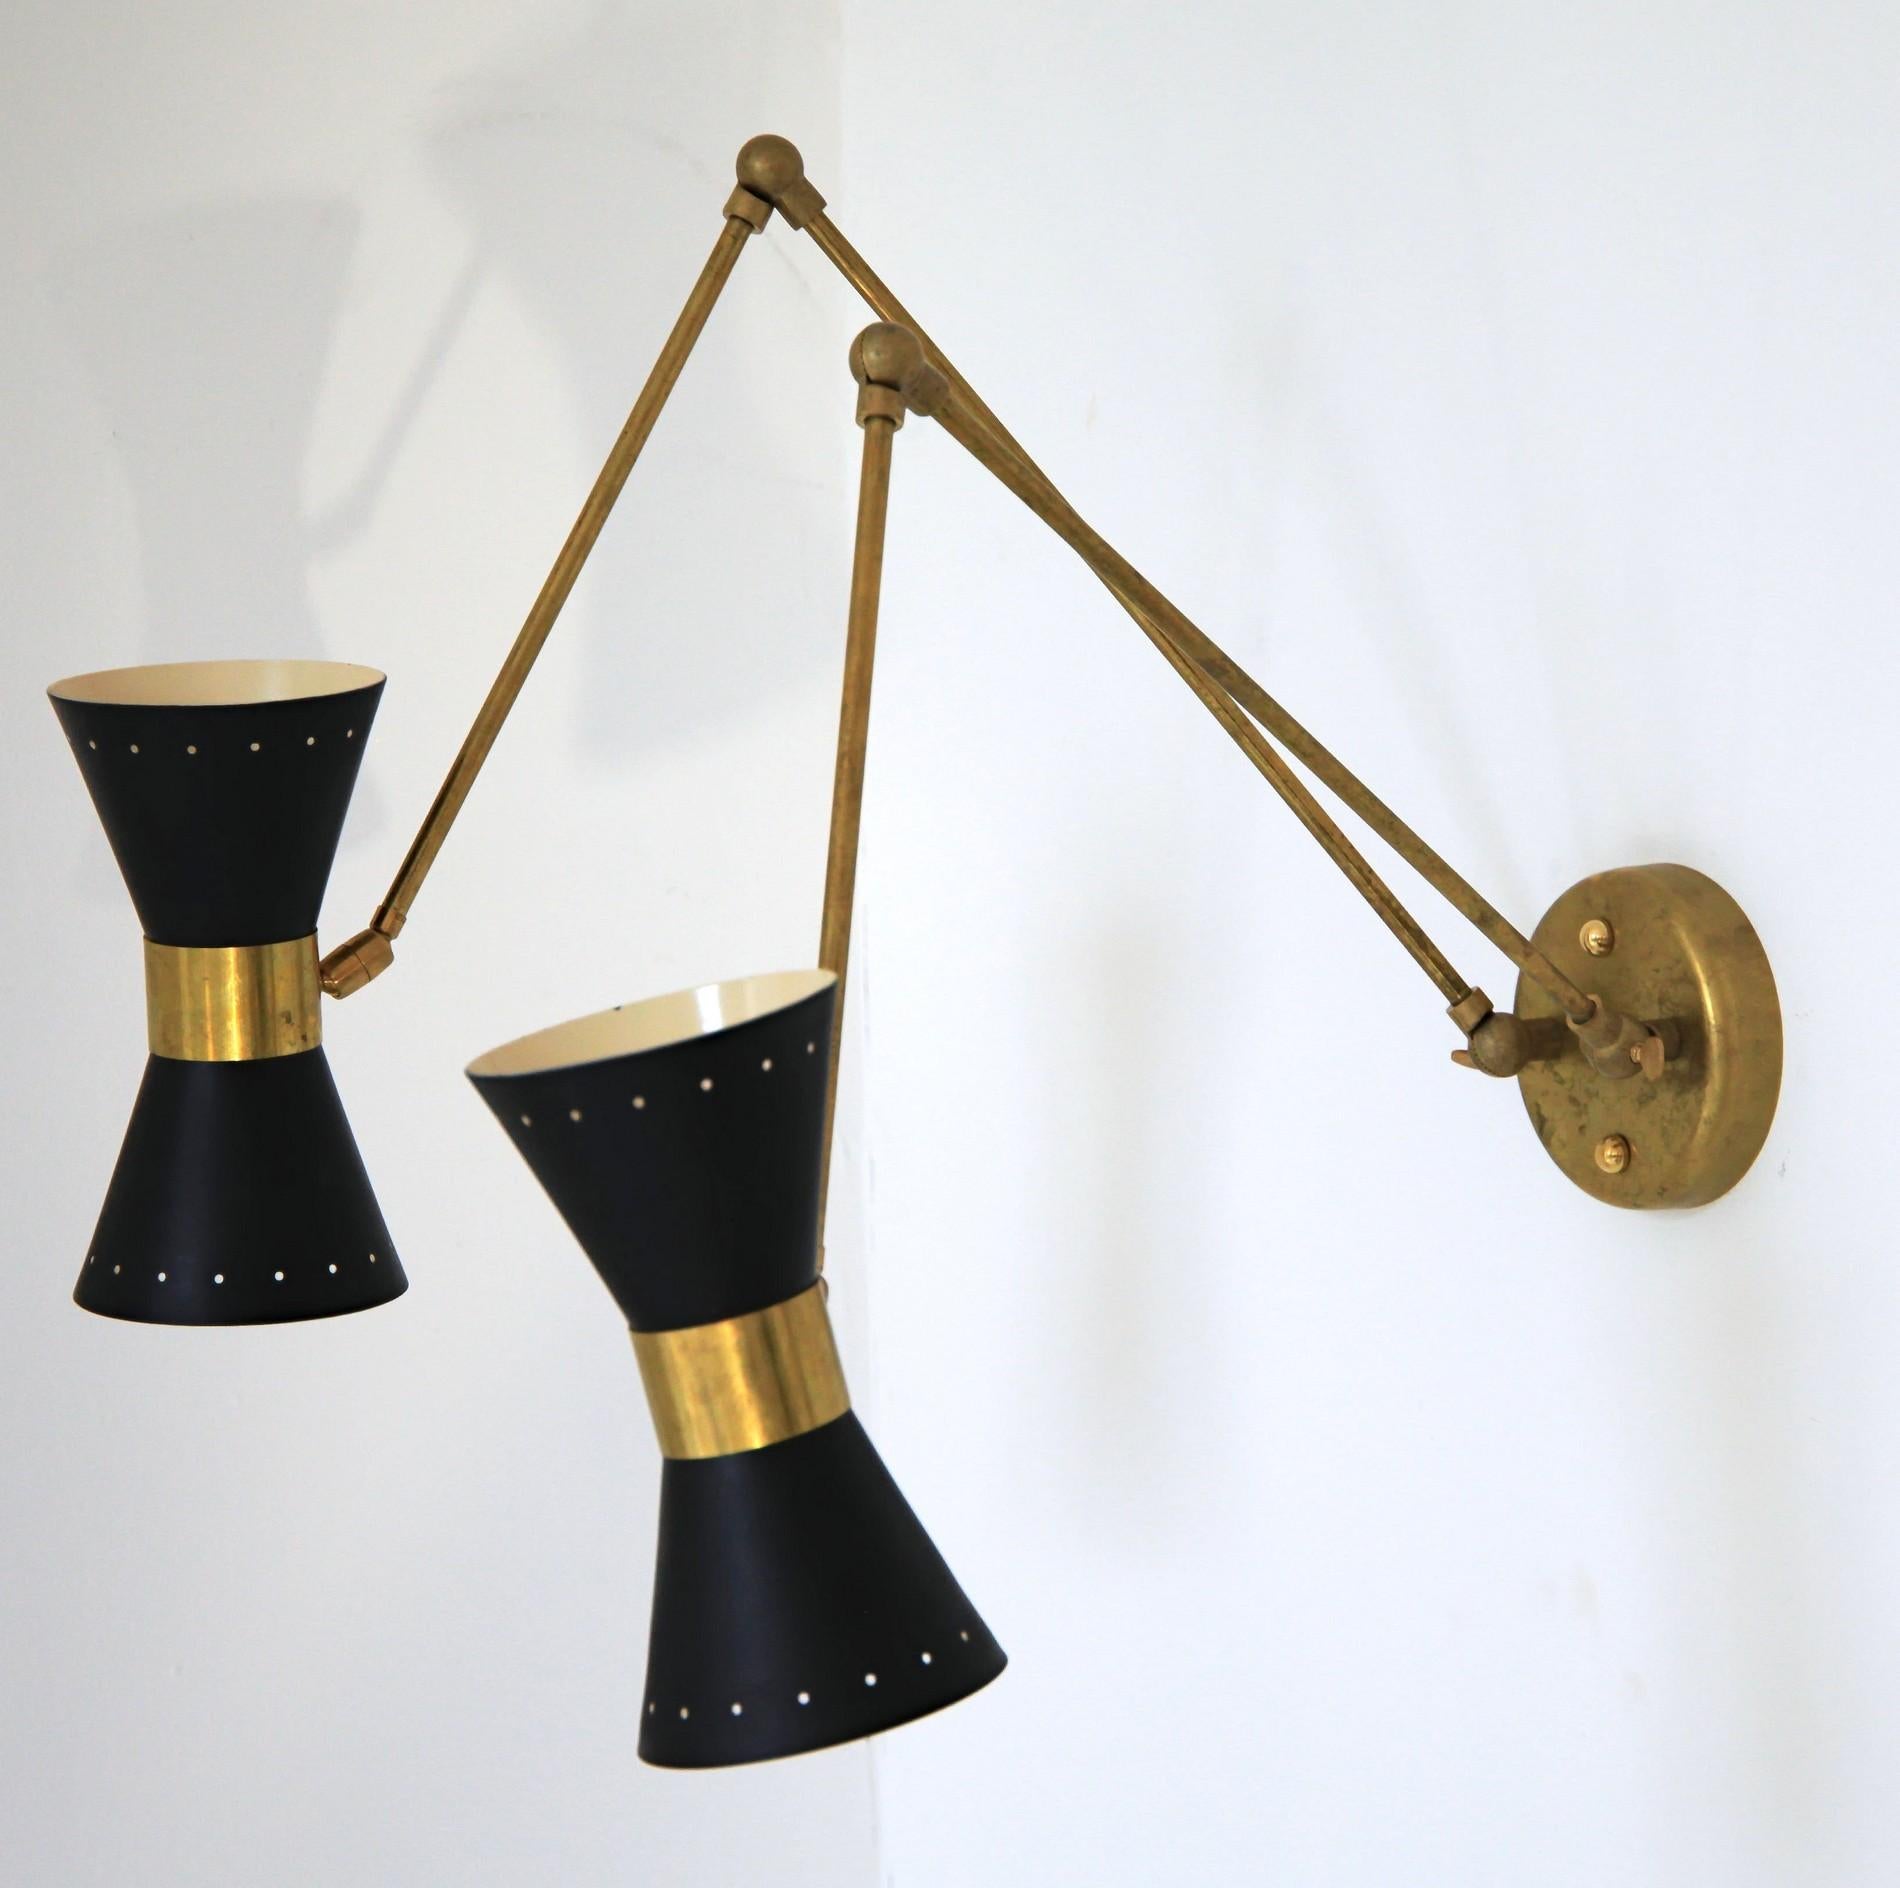 Enameled Double Articulated Sconce, Midcentury Stilnovo Style Solid Brass Black Shades